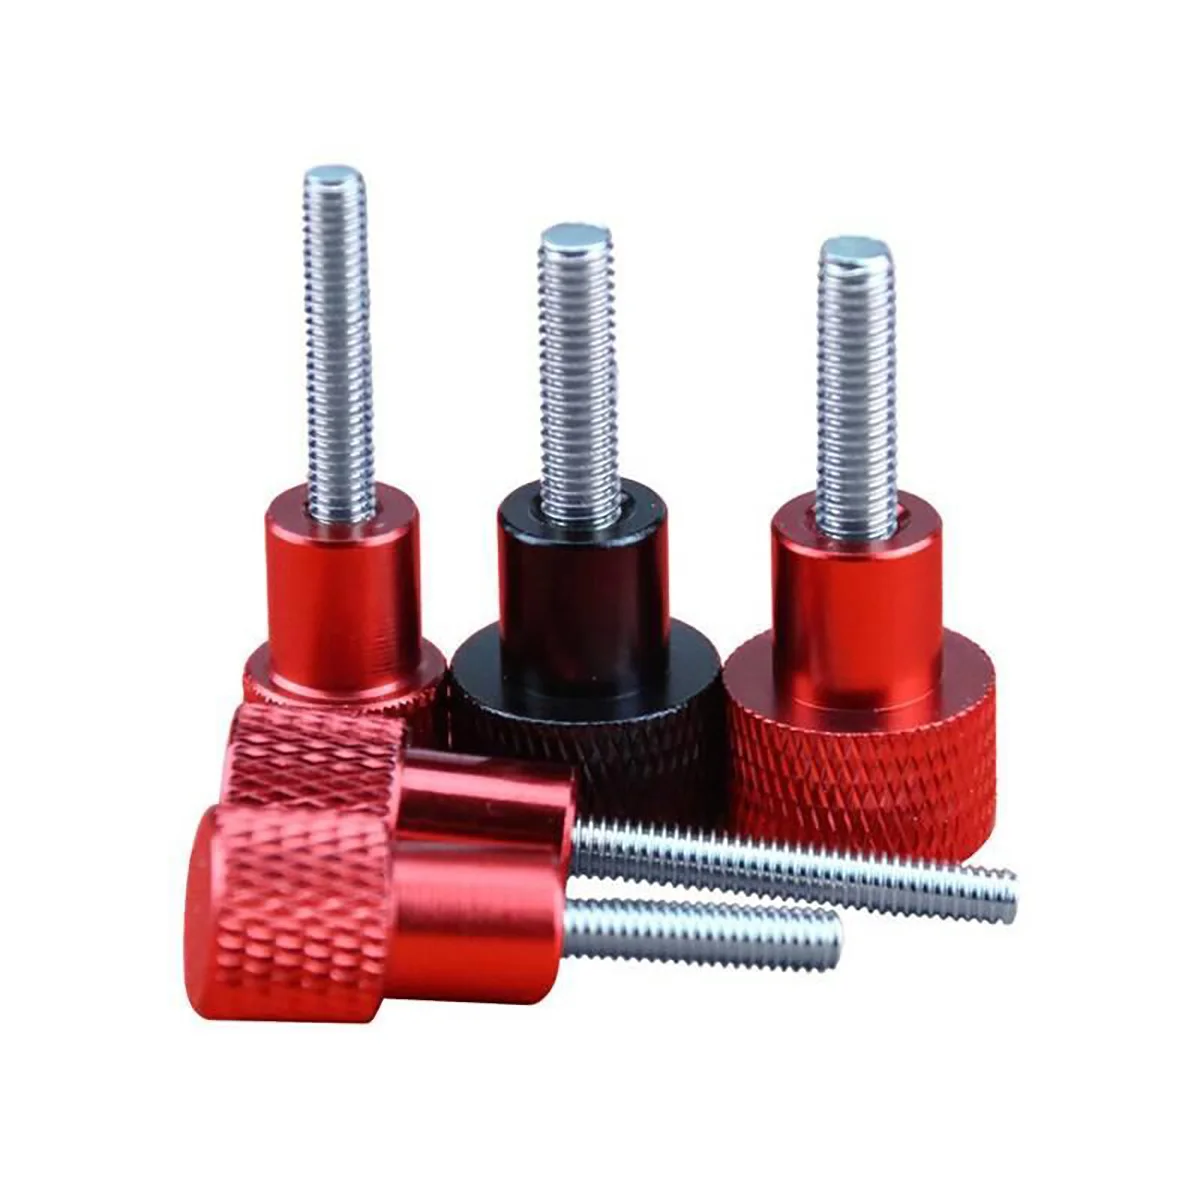 M3 Stainless Steel Round Head Knurled Thumb Screws Hand Grip Knob Bolts 